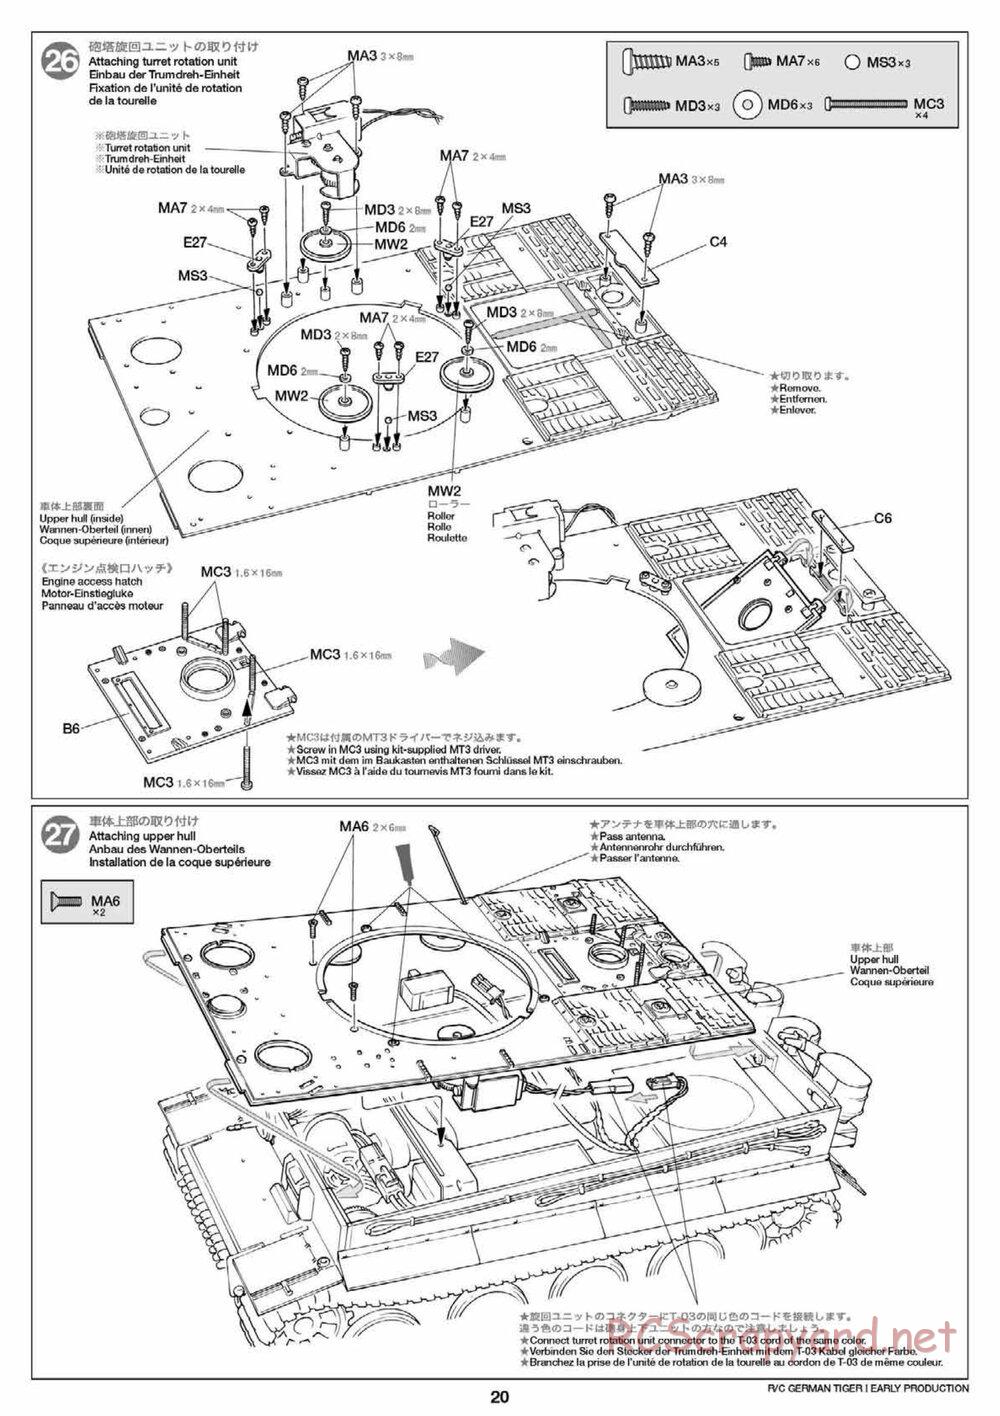 Tamiya - Tiger I Early Production - 1/16 Scale Chassis - Manual - Page 20